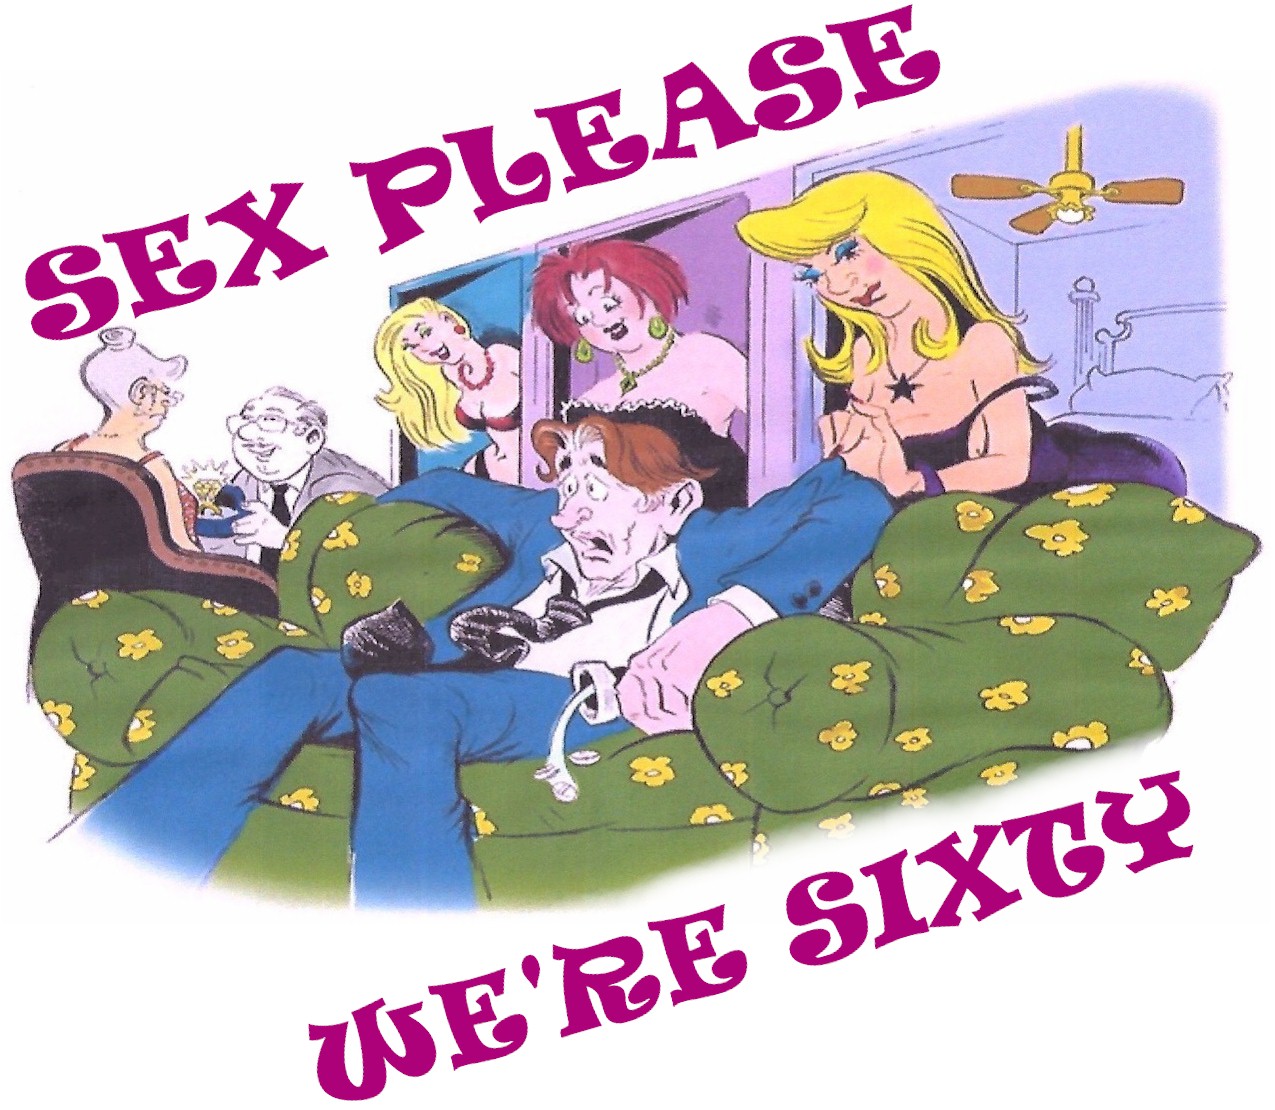 Sex please, we're sixty